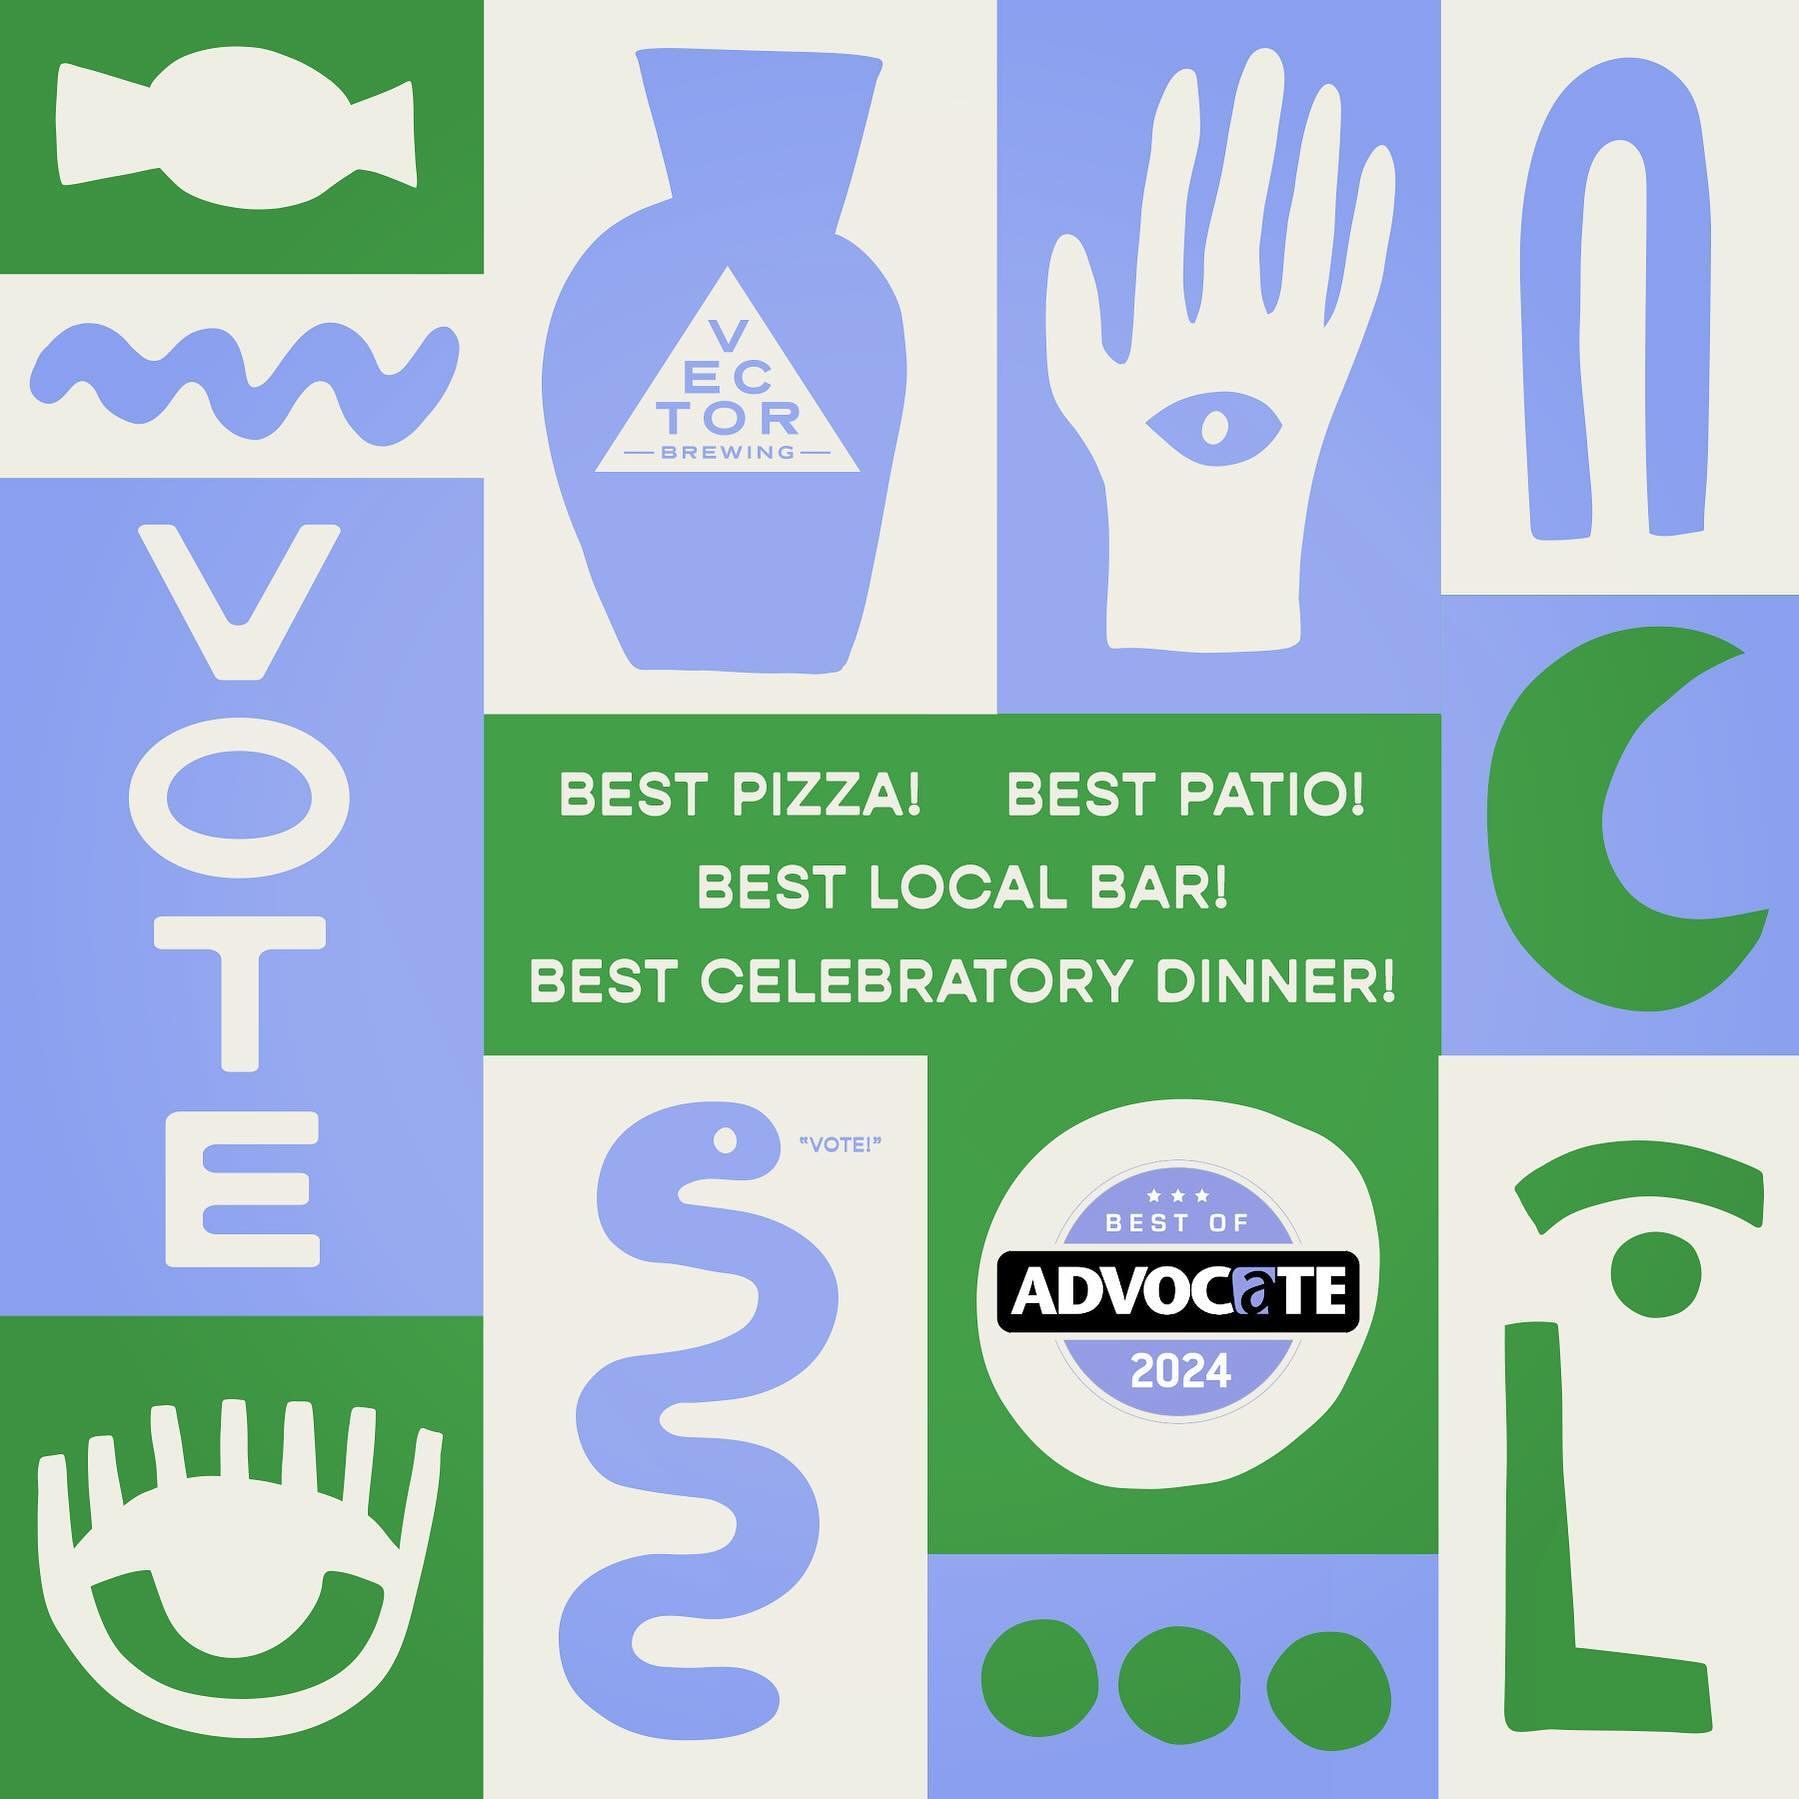 Cast your vote!🗳

We&rsquo;re honored to have once again been nominated in the&nbsp;@lakehighlandsadvocate Best of 2024 issue in a range of drinking and dining categories. If you have a moment, we sure would appreciate your vote. We&rsquo;re up for 